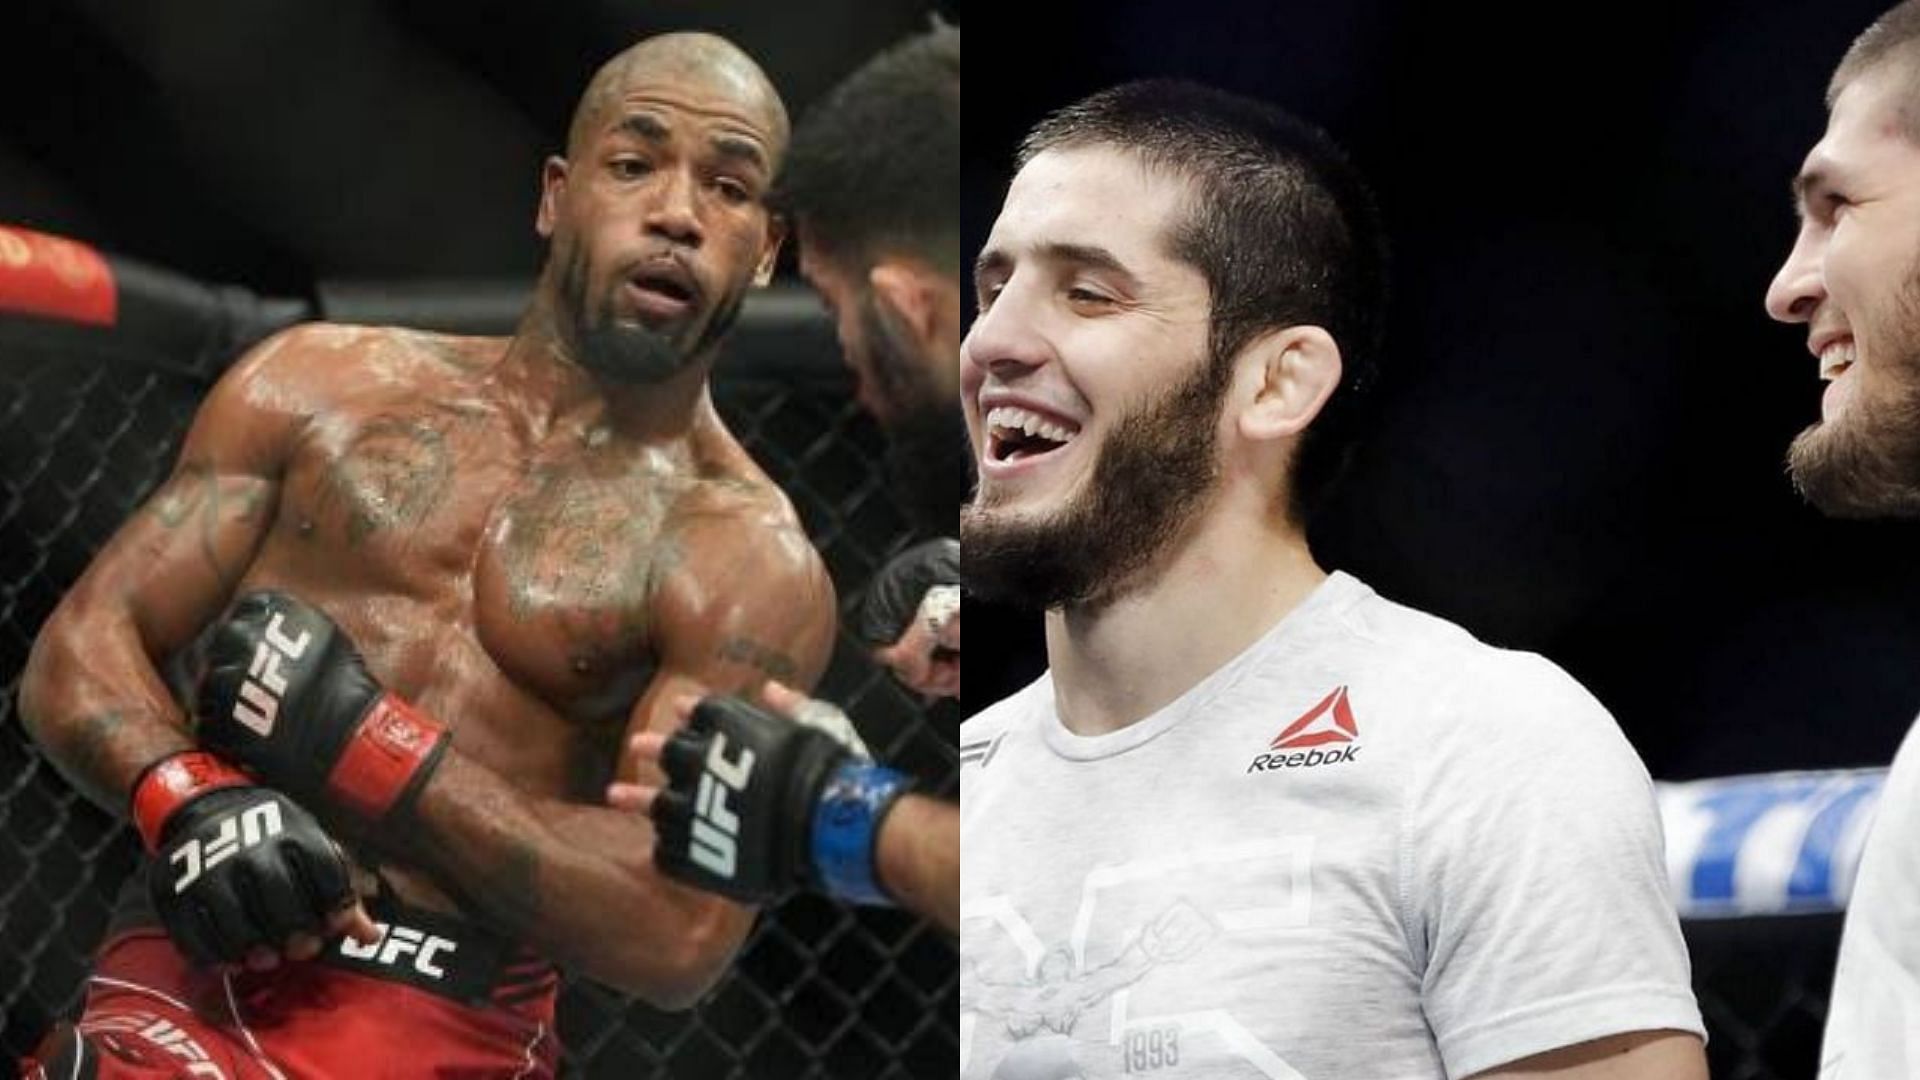 Bobby Green (left) and Islam Makhachev (right)